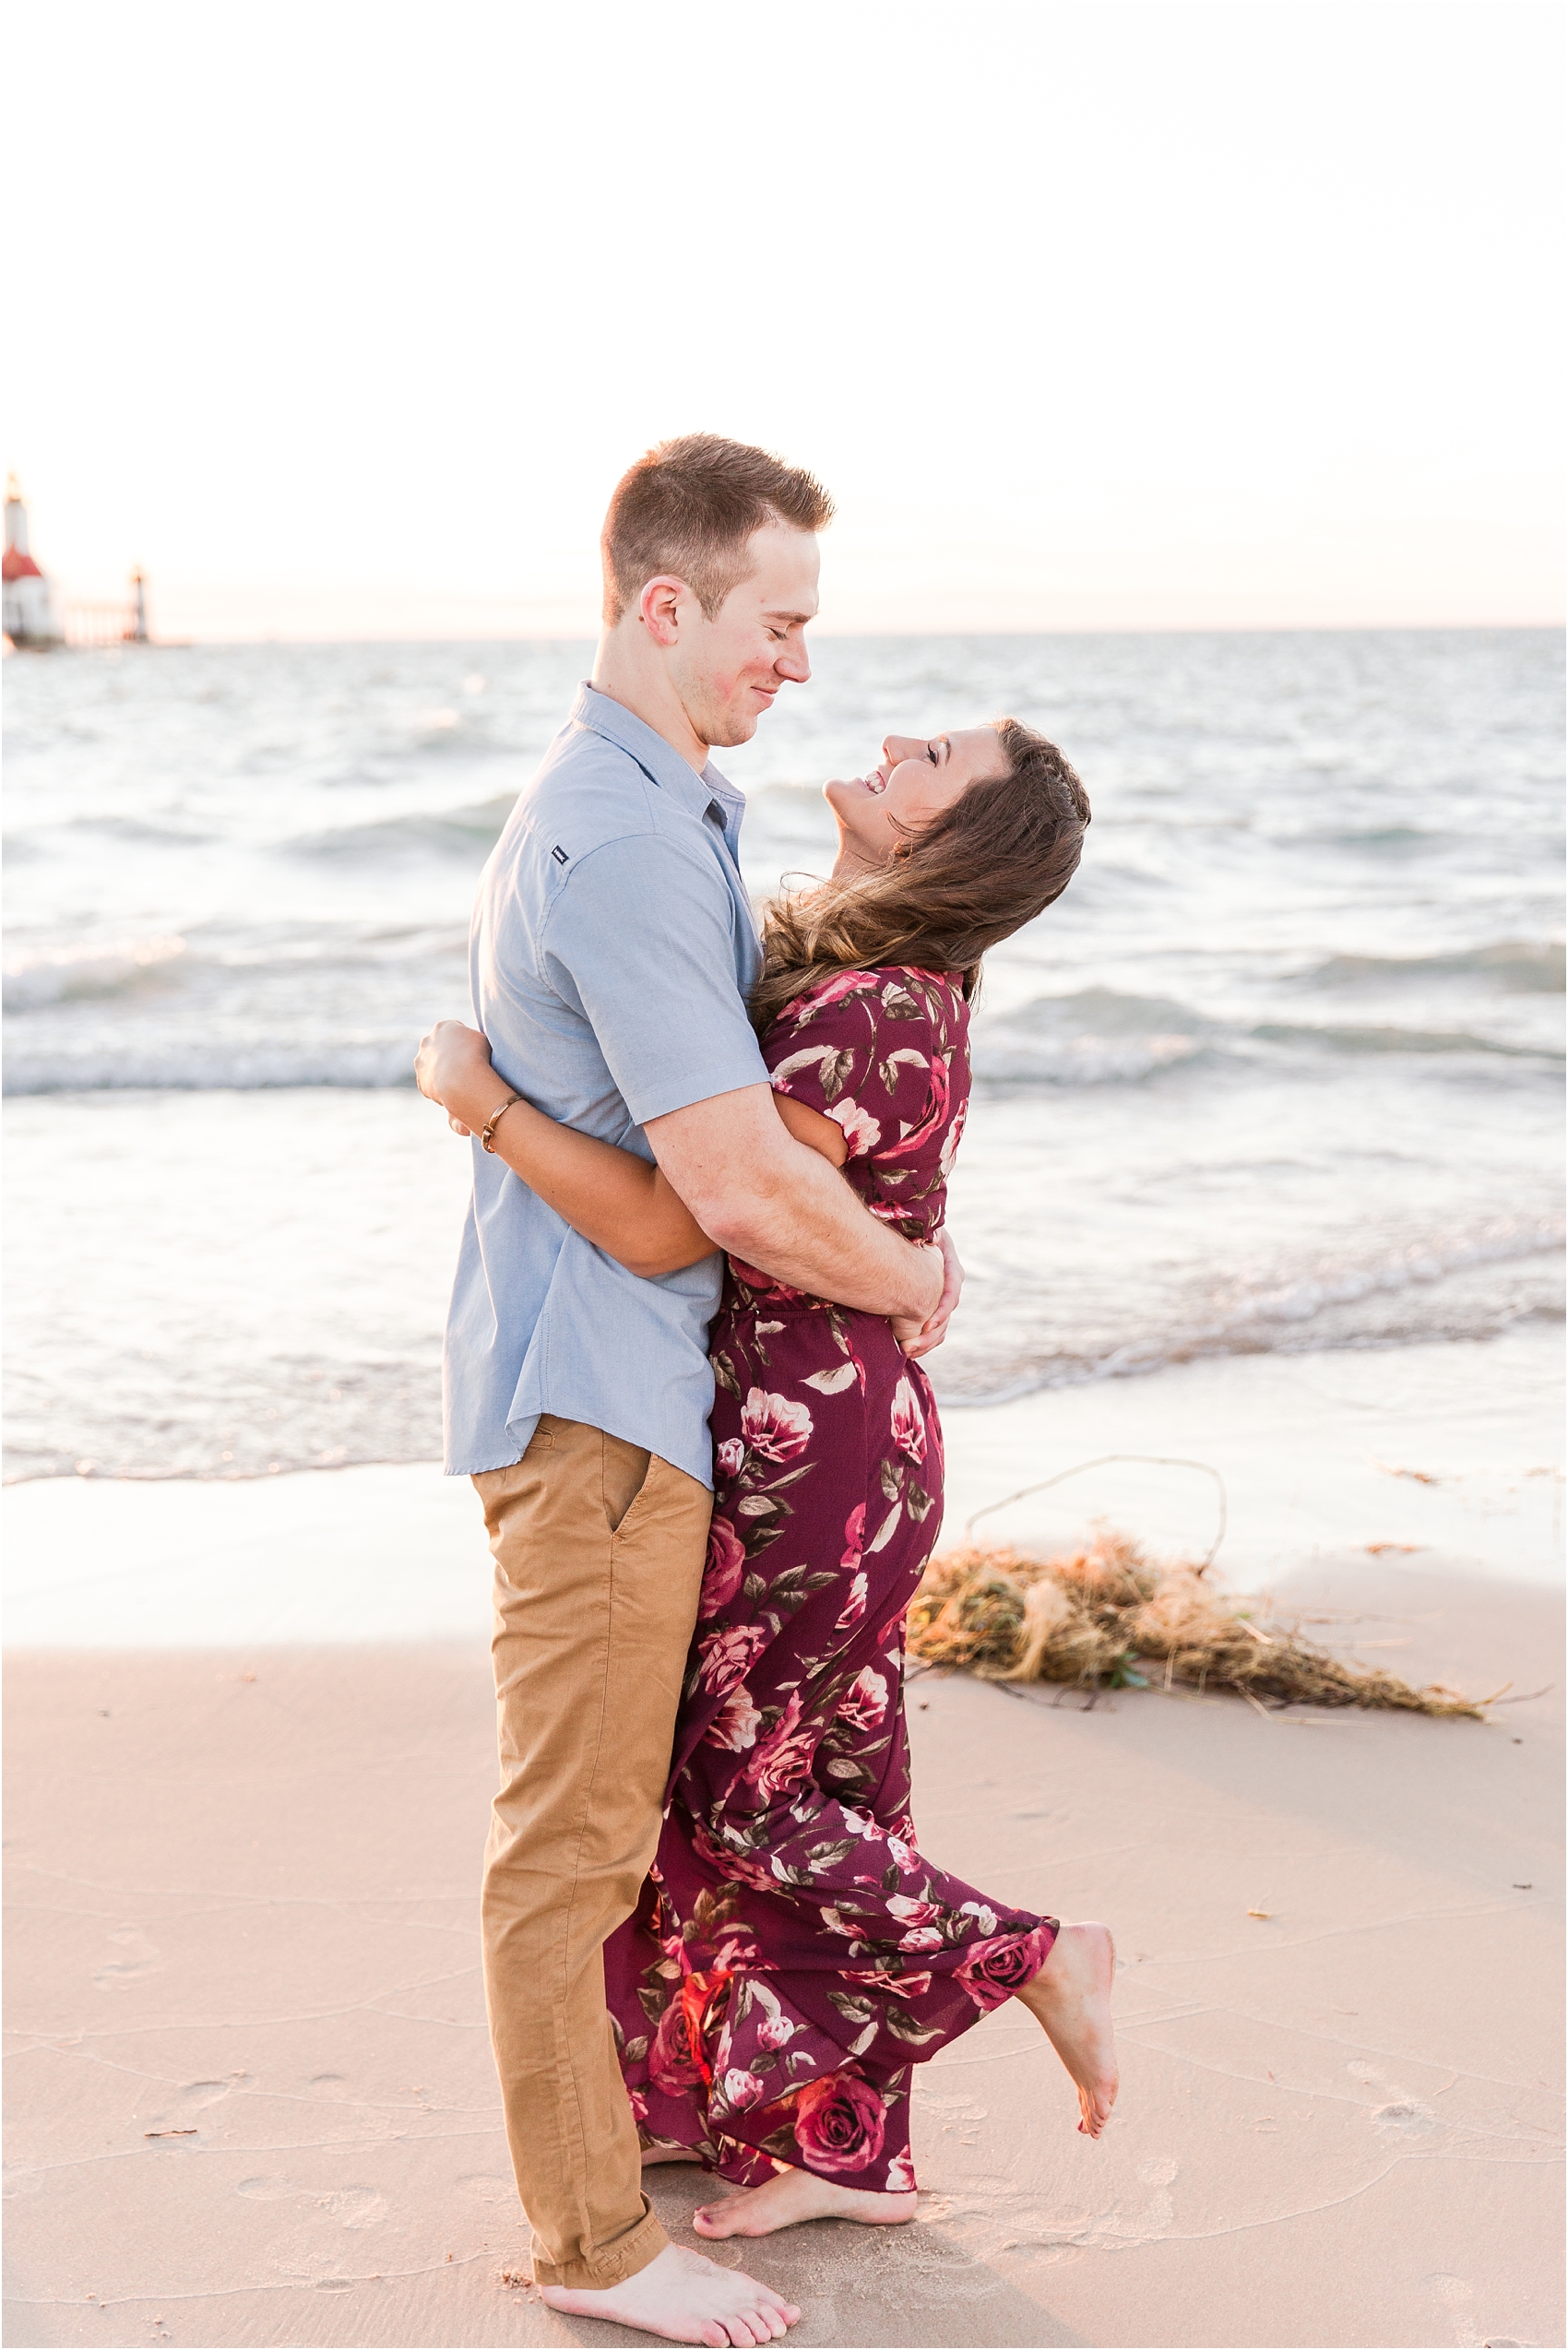 candid-end-of-summer-sunset-engagement-photos-at-silver-beach-in-st-joseph-mi-by-courtney-carolyn-photography_0032.jpg